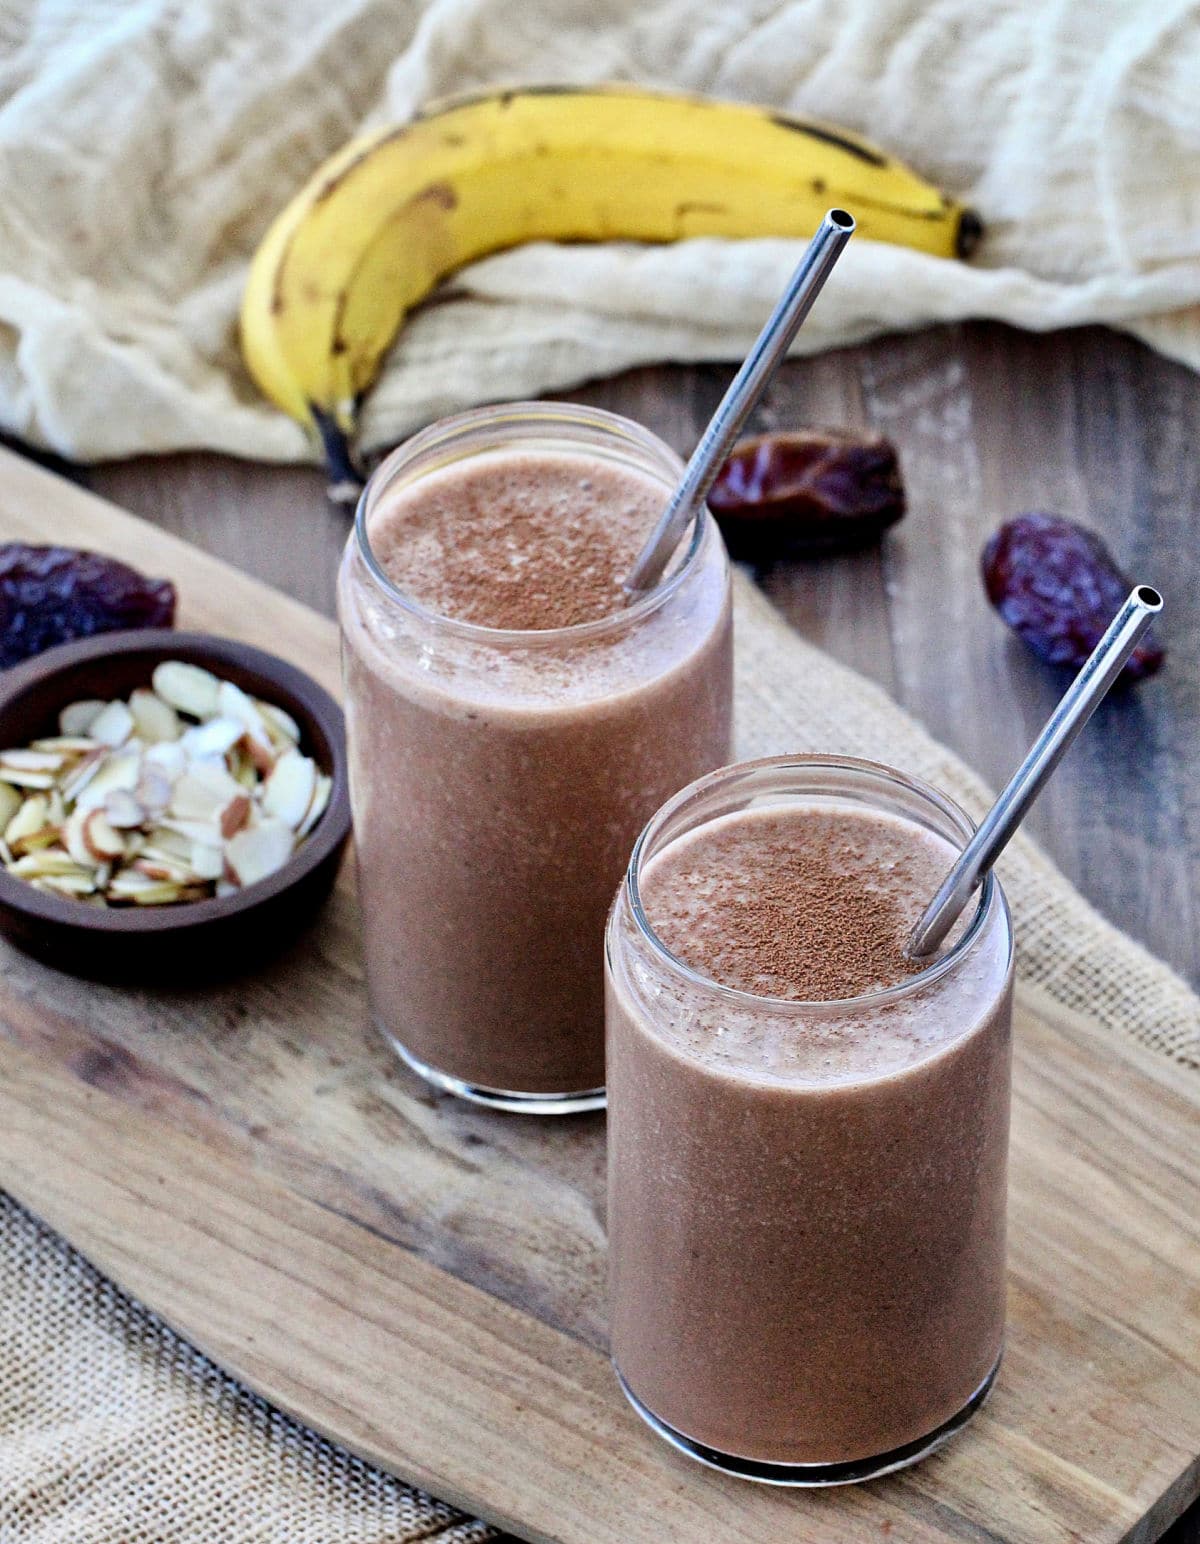 Two healthy chocolate smoothies in glasses with metal straws in them.